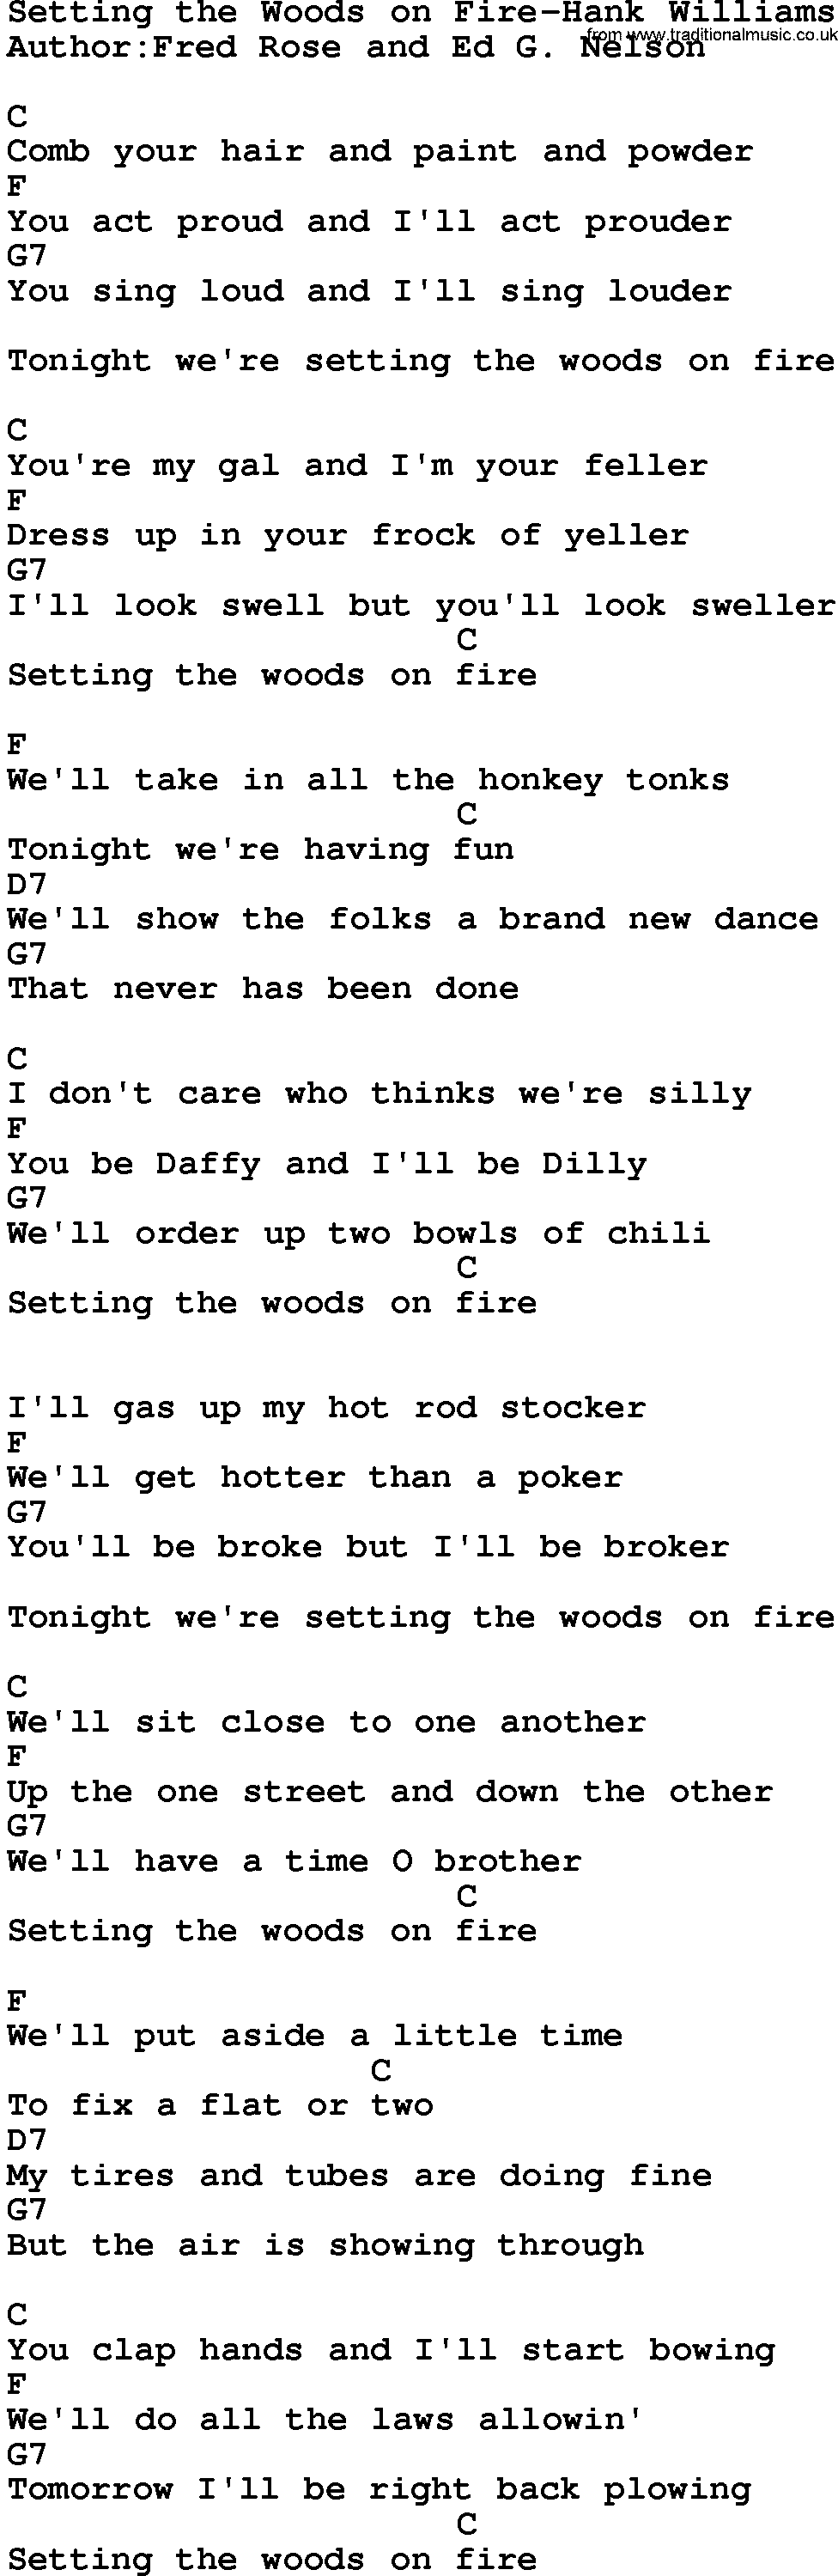 Country music song: Setting The Woods On Fire-Hank Williams lyrics and chords